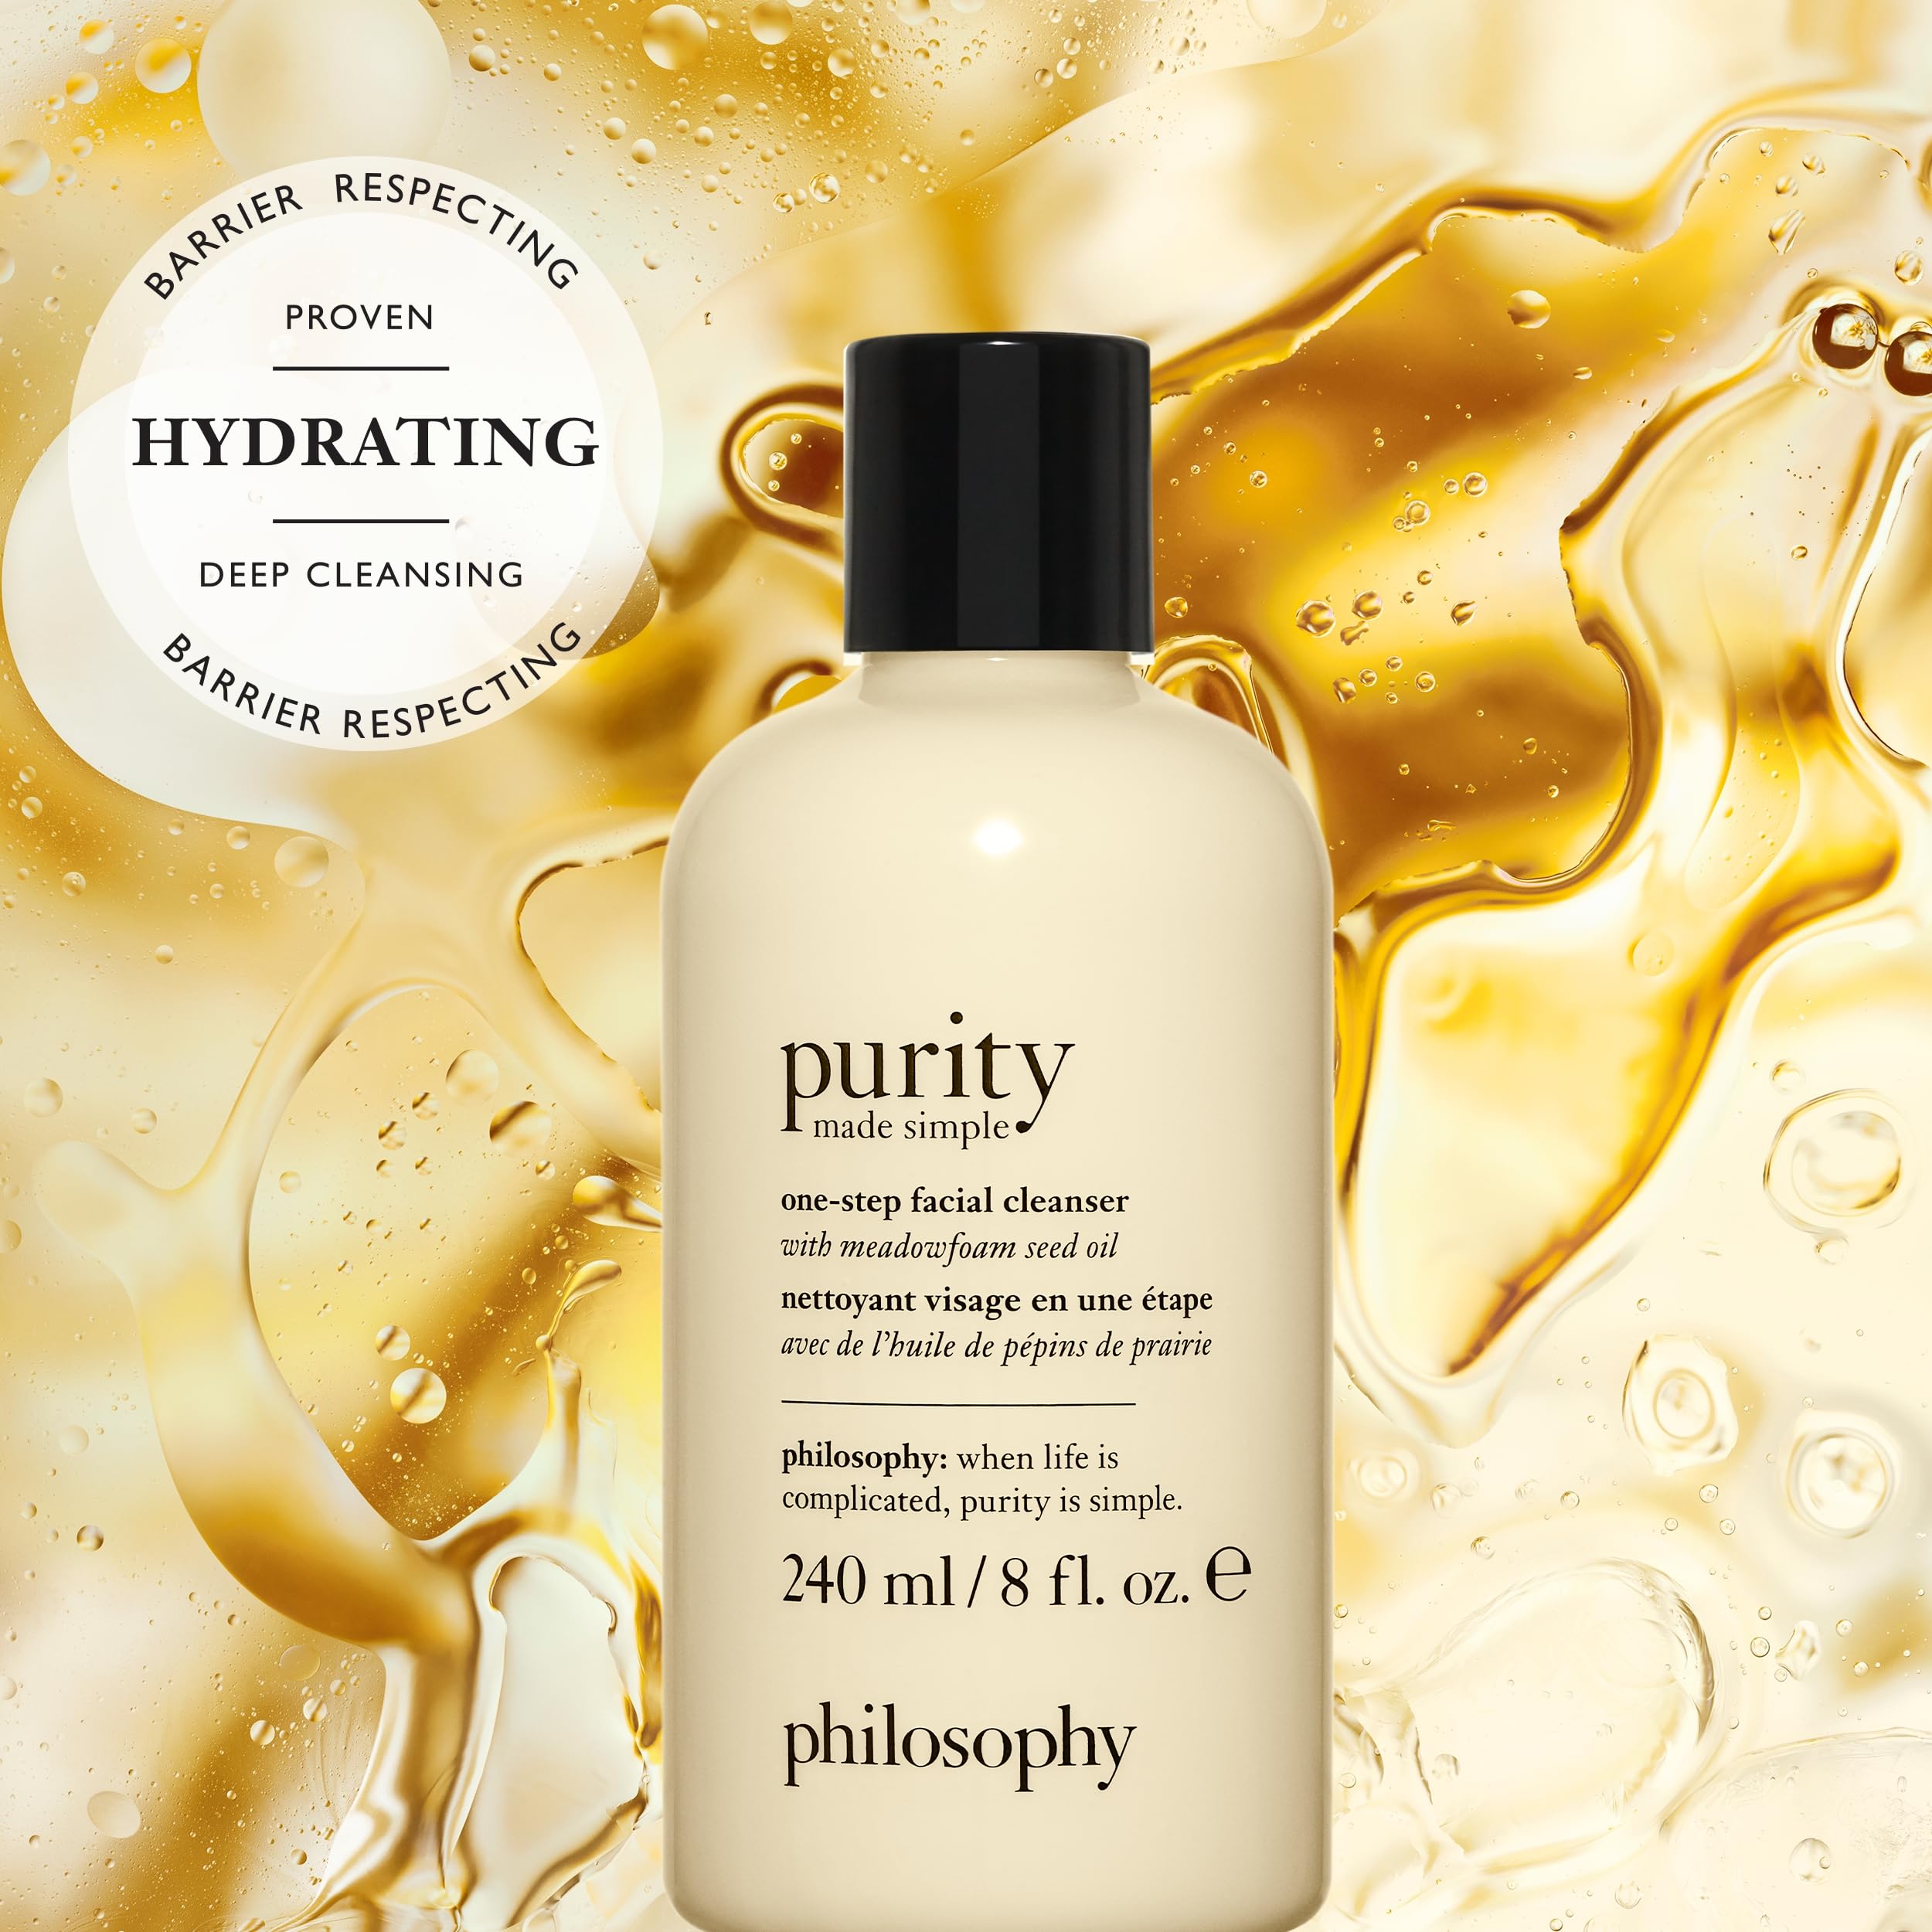 philosophy purity made simple one-step facial cleanser, 3 oz $7 - Amazon